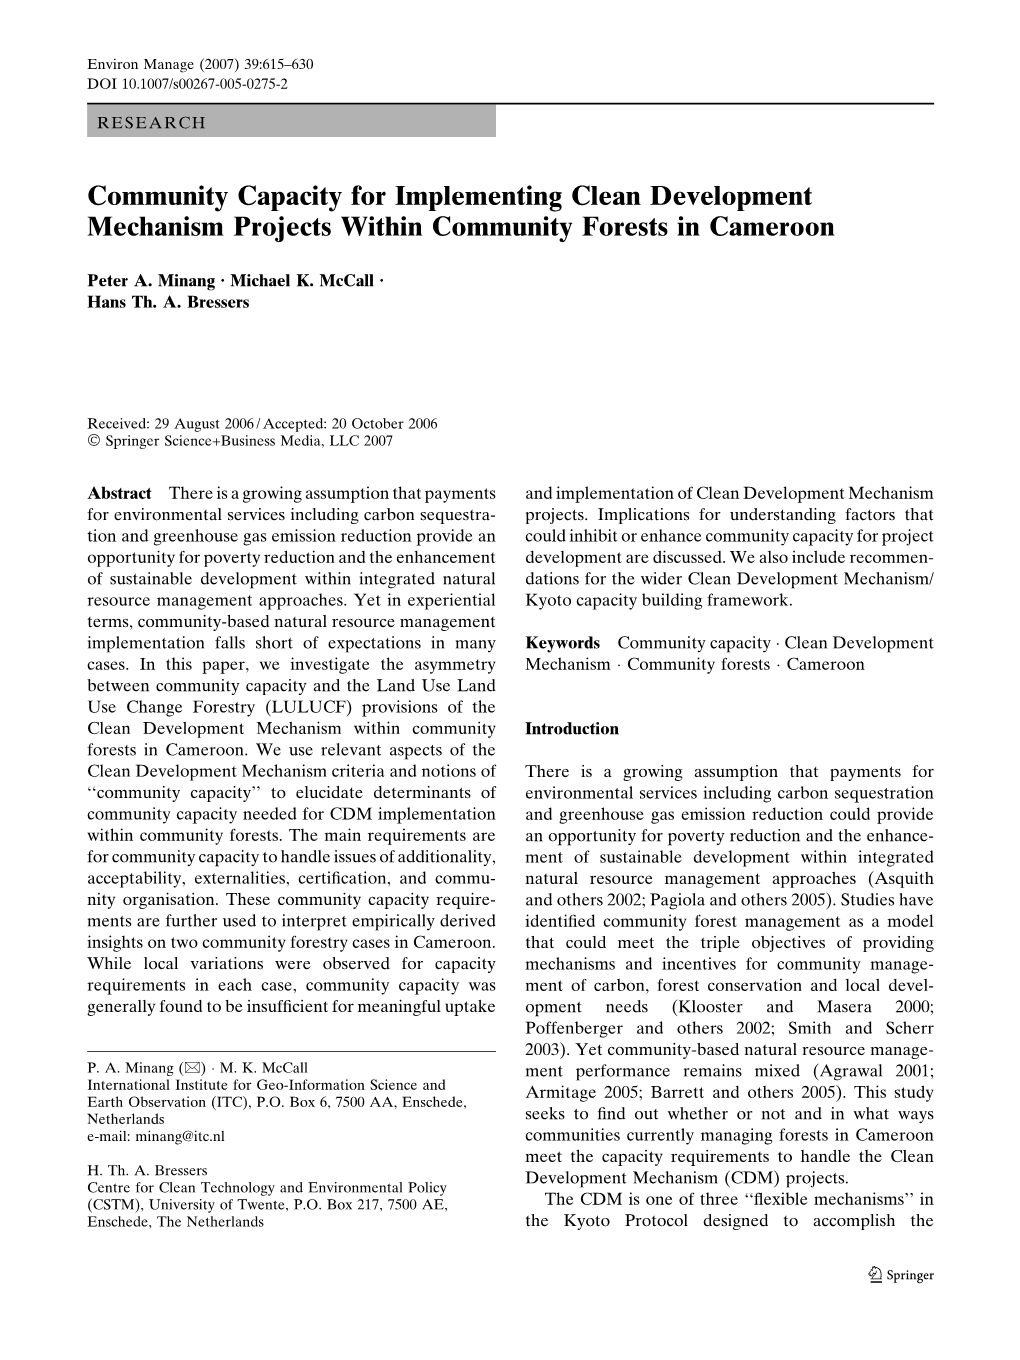 Community Capacity for Implementing Clean Development Mechanism Projects Within Community Forests in Cameroon